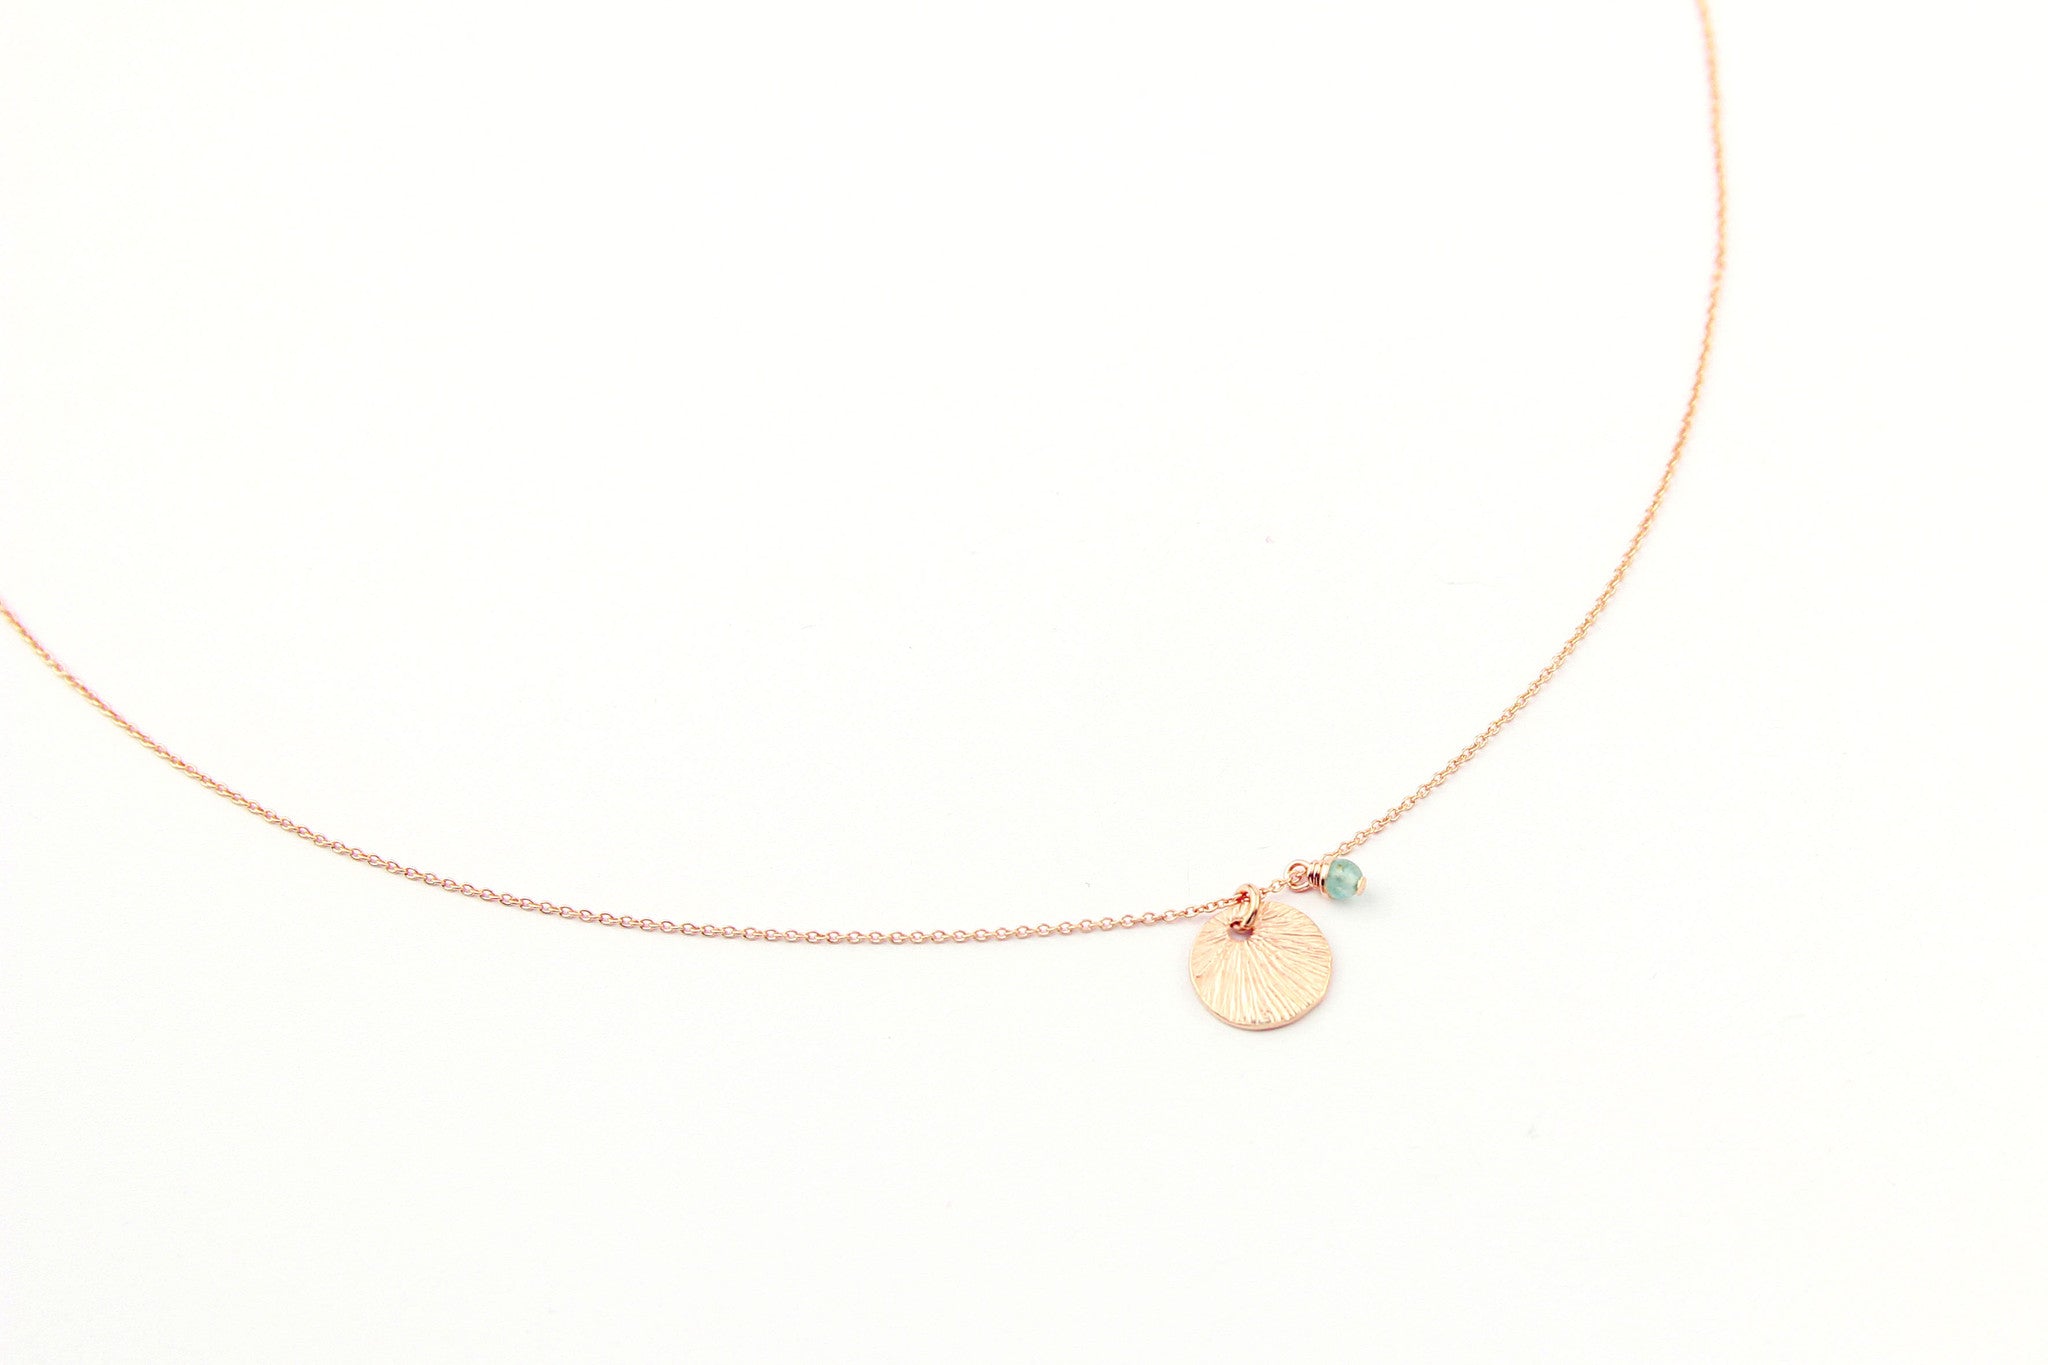 jewelberry necklace kette small shell anchor chain rose gold plated sterling silver fine jewelry handmade with love fairtrade